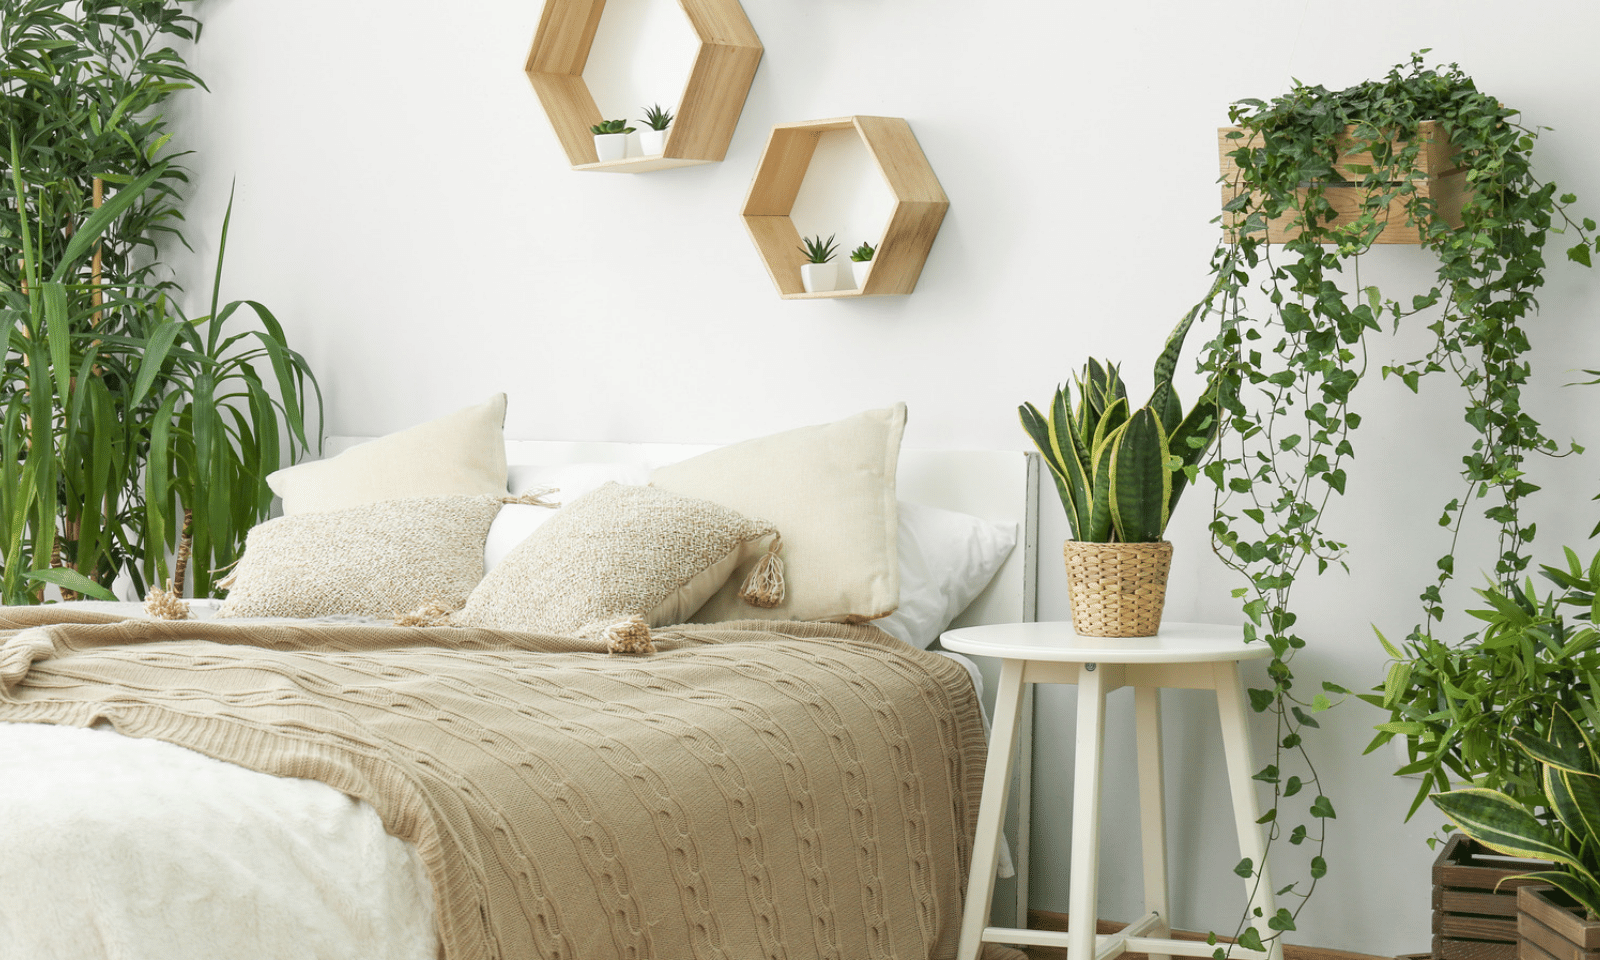 IS IT A GOOD IDEA TO HAVE PLANTS IN YOUR BEDROOM?